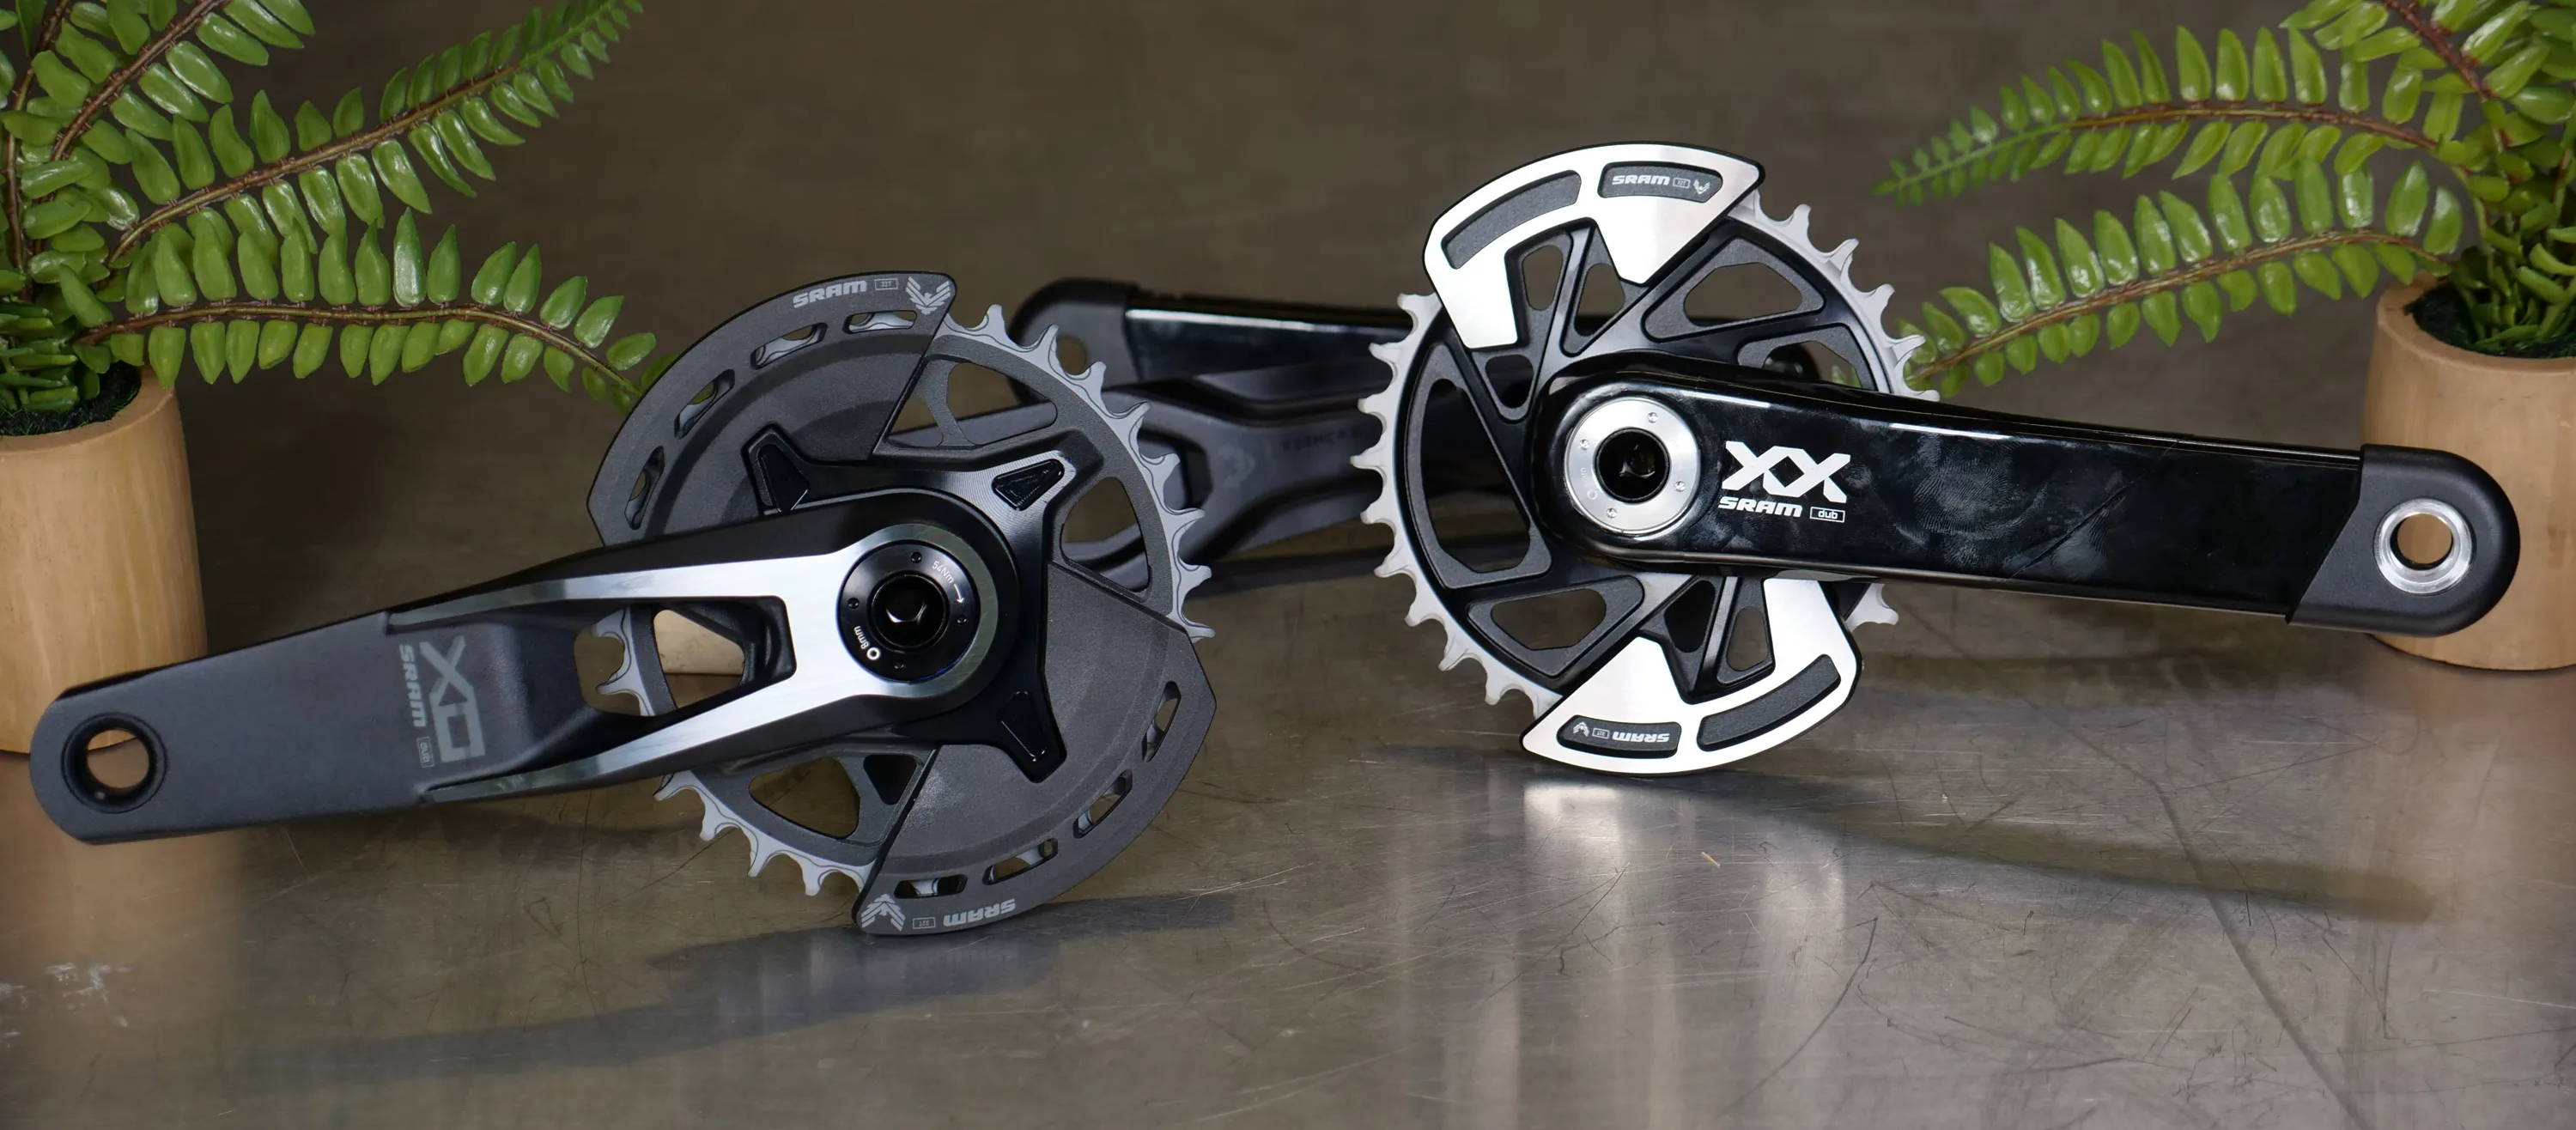 sram x0 and xx axs transmission cranksets on a table with ferns